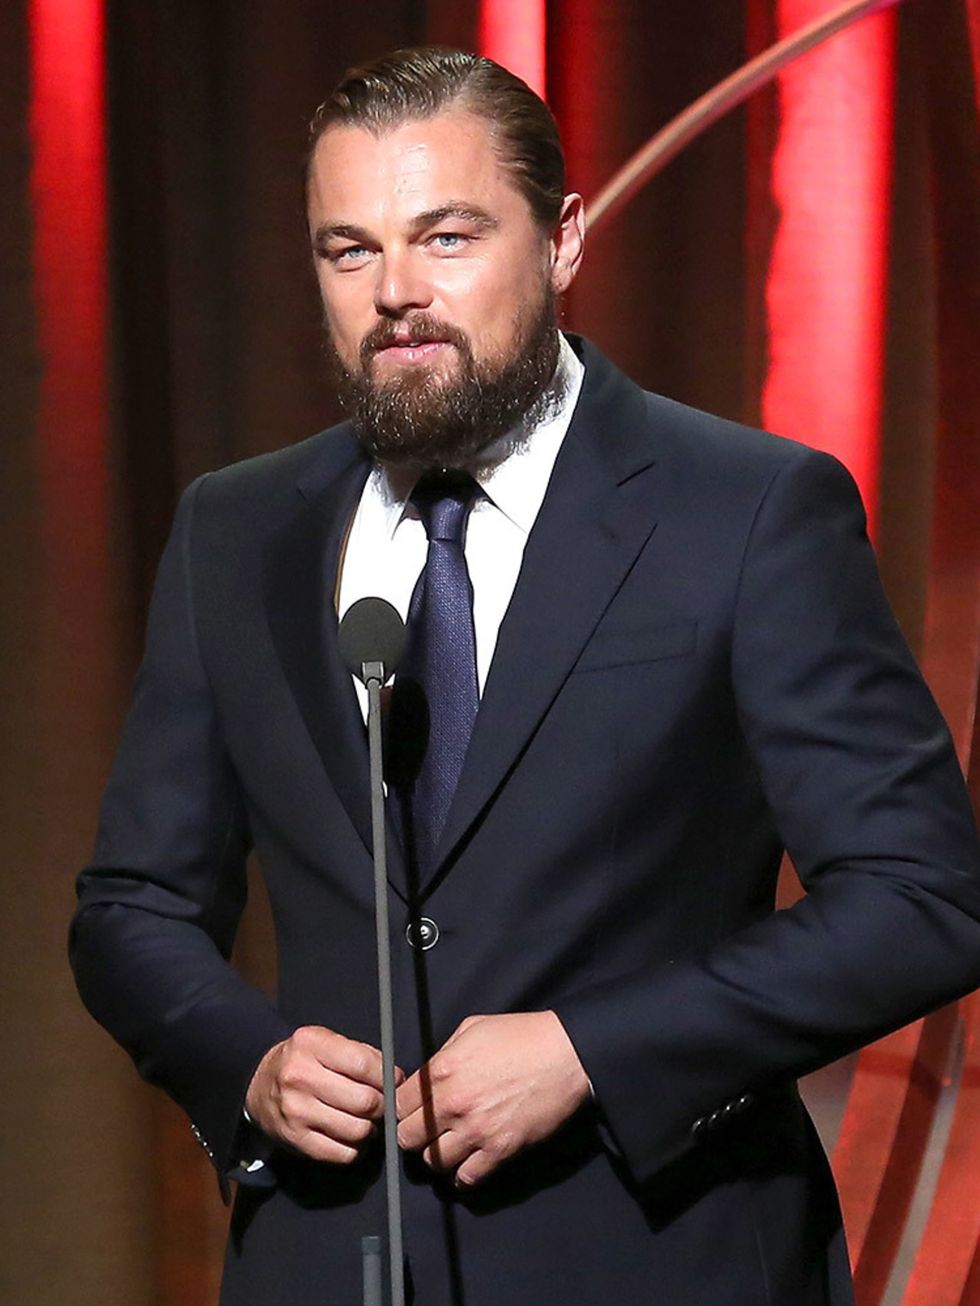 <p>Leonardo DiCaprio ELLE says 'A little manly stubble yes, but a full-on beard, hmm, we're not convinced.'</p>

<p>Leo talks at the 2014 Annual Clinton Global Citizen Awards.</p>